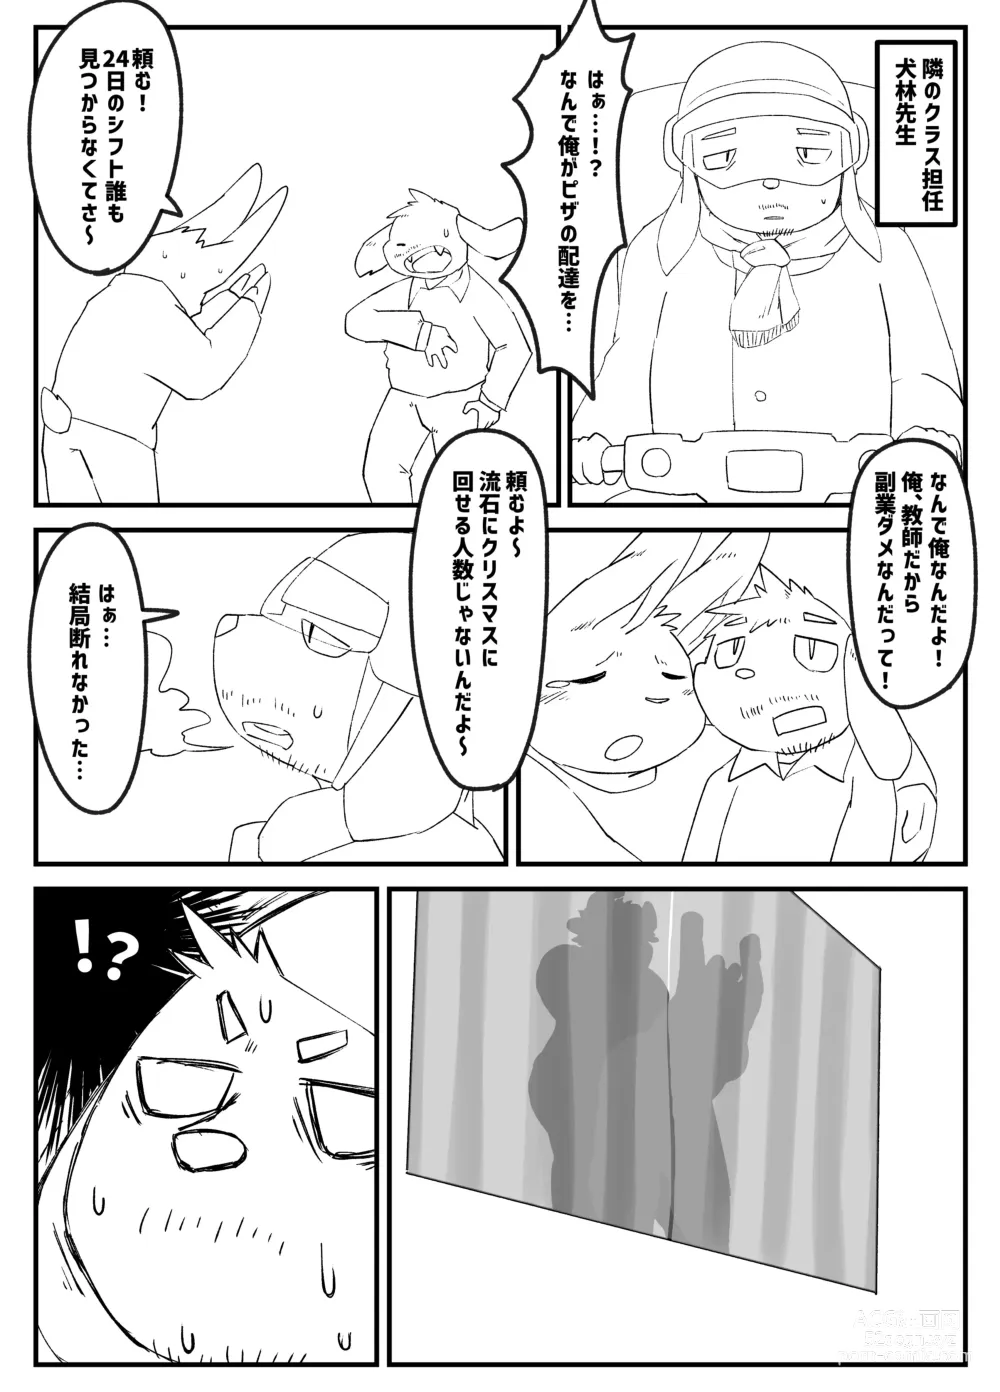 Page 6 of doujinshi Muscular Bull Teacher & Chubby Tiger Student 5